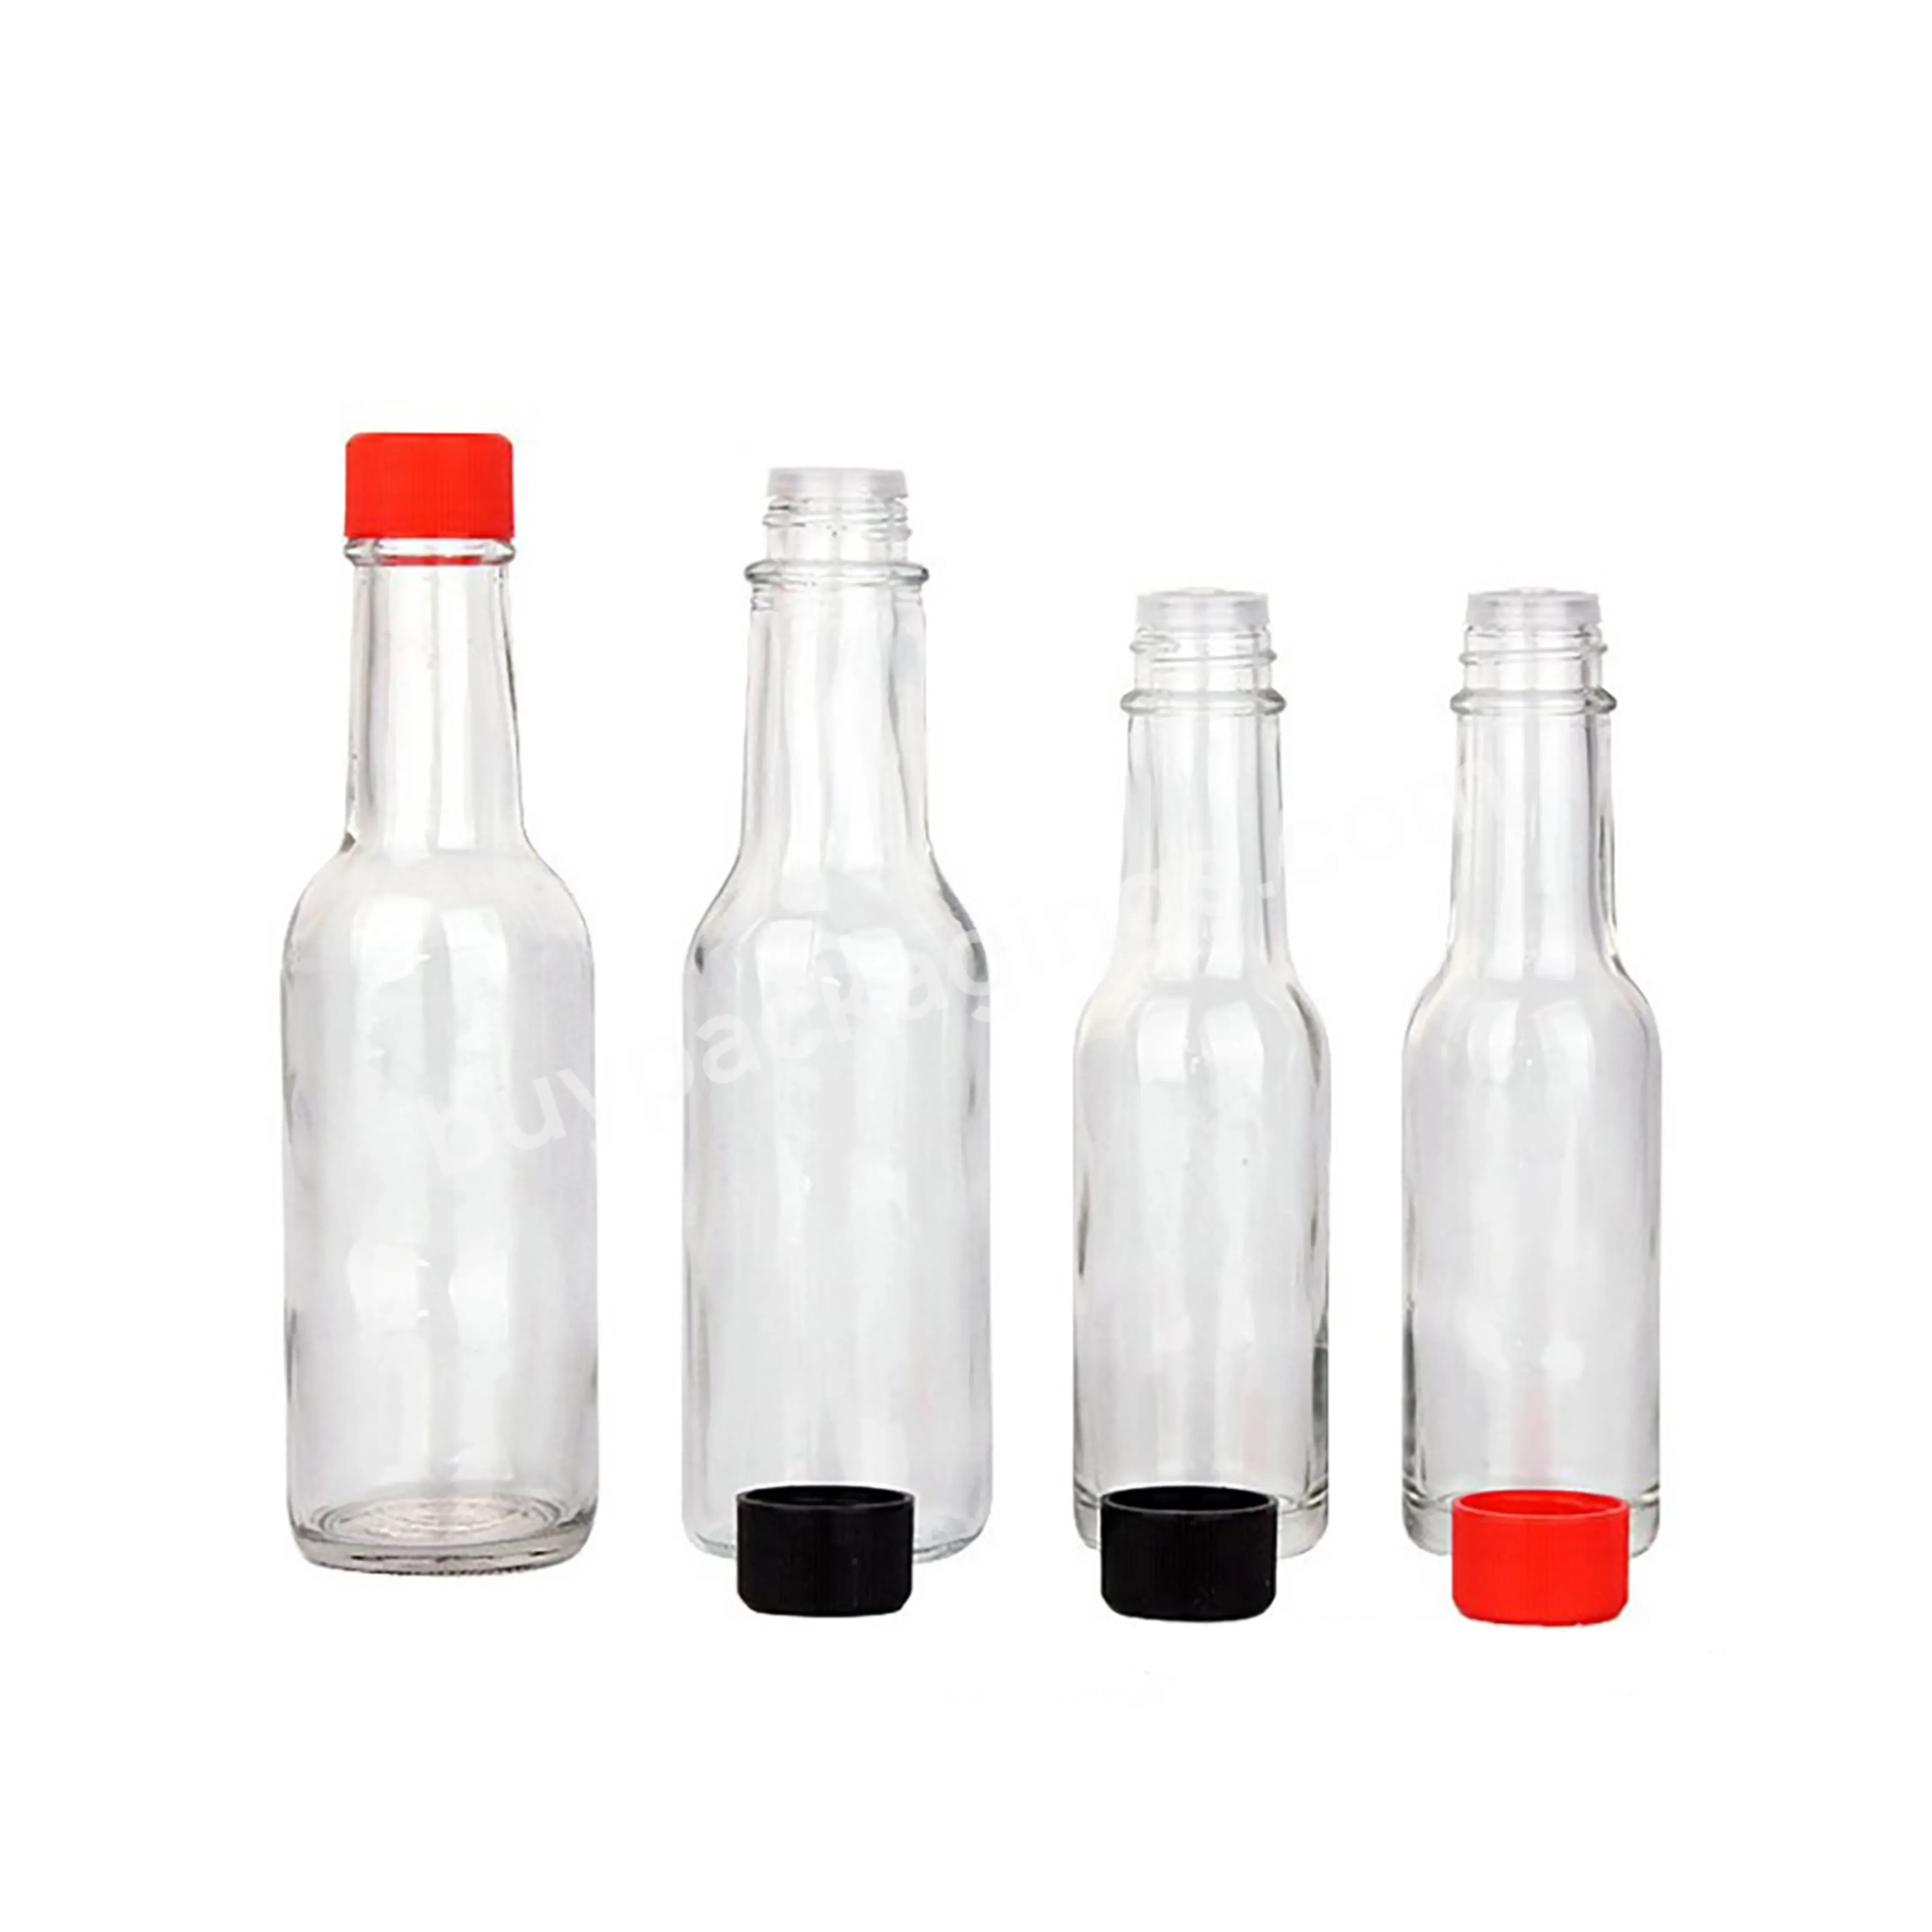 Stock 90ml 150ml 200ml Round Clear Soy Sauce Bottle 3oz 5oz High White Glass Ketchup Bottle For Beverage Drink With Plastic Cap - Buy Stock 90ml 150ml 200ml Round Clear Seasoning Soy Sauce Bottle,3oz 5oz Glass High White Glass Kitchen Sauce Bottle,Gl